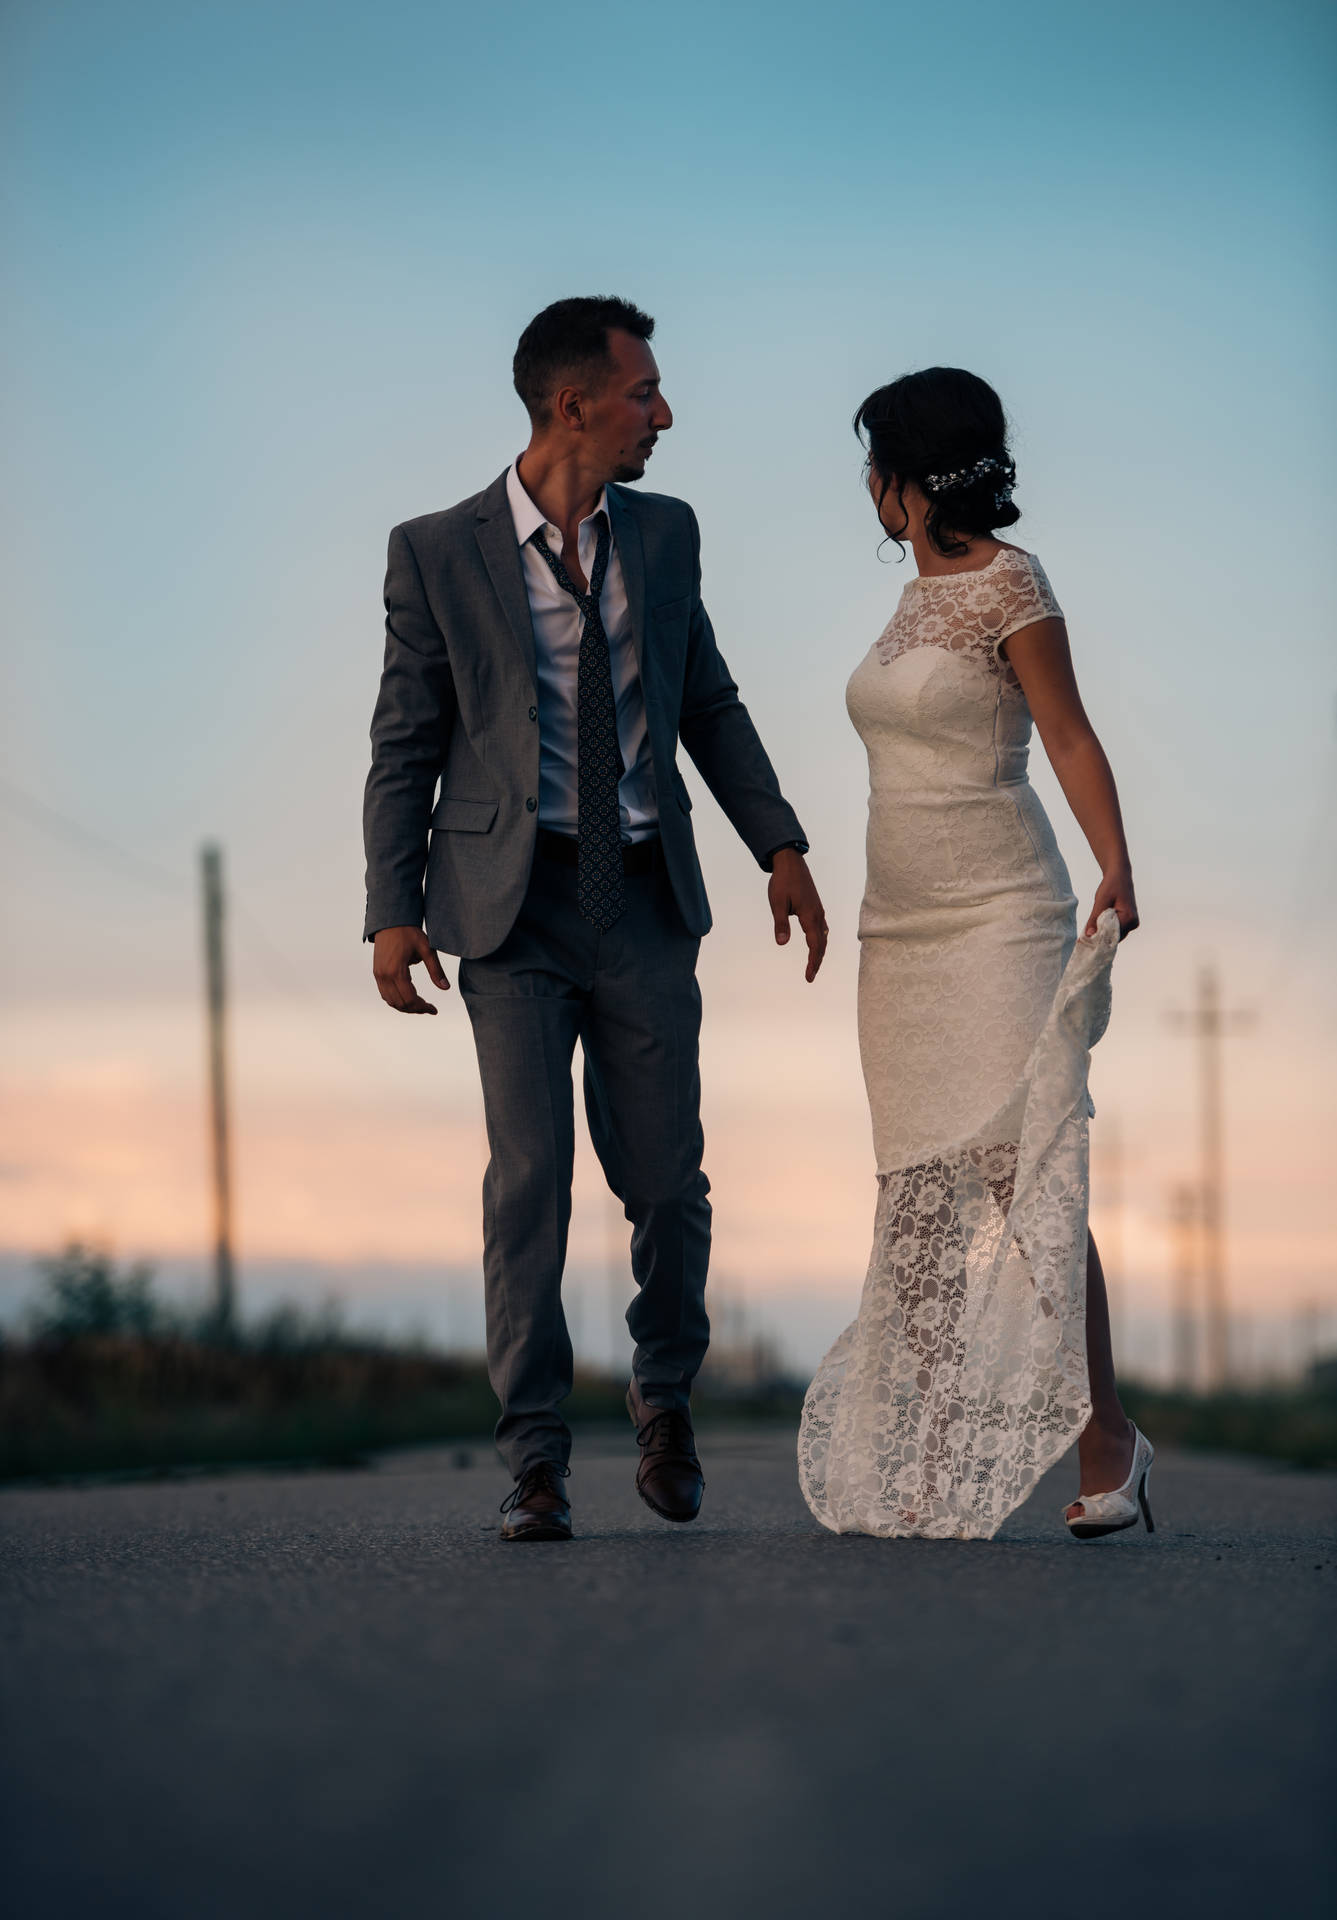 Groom And Bride In Road Background